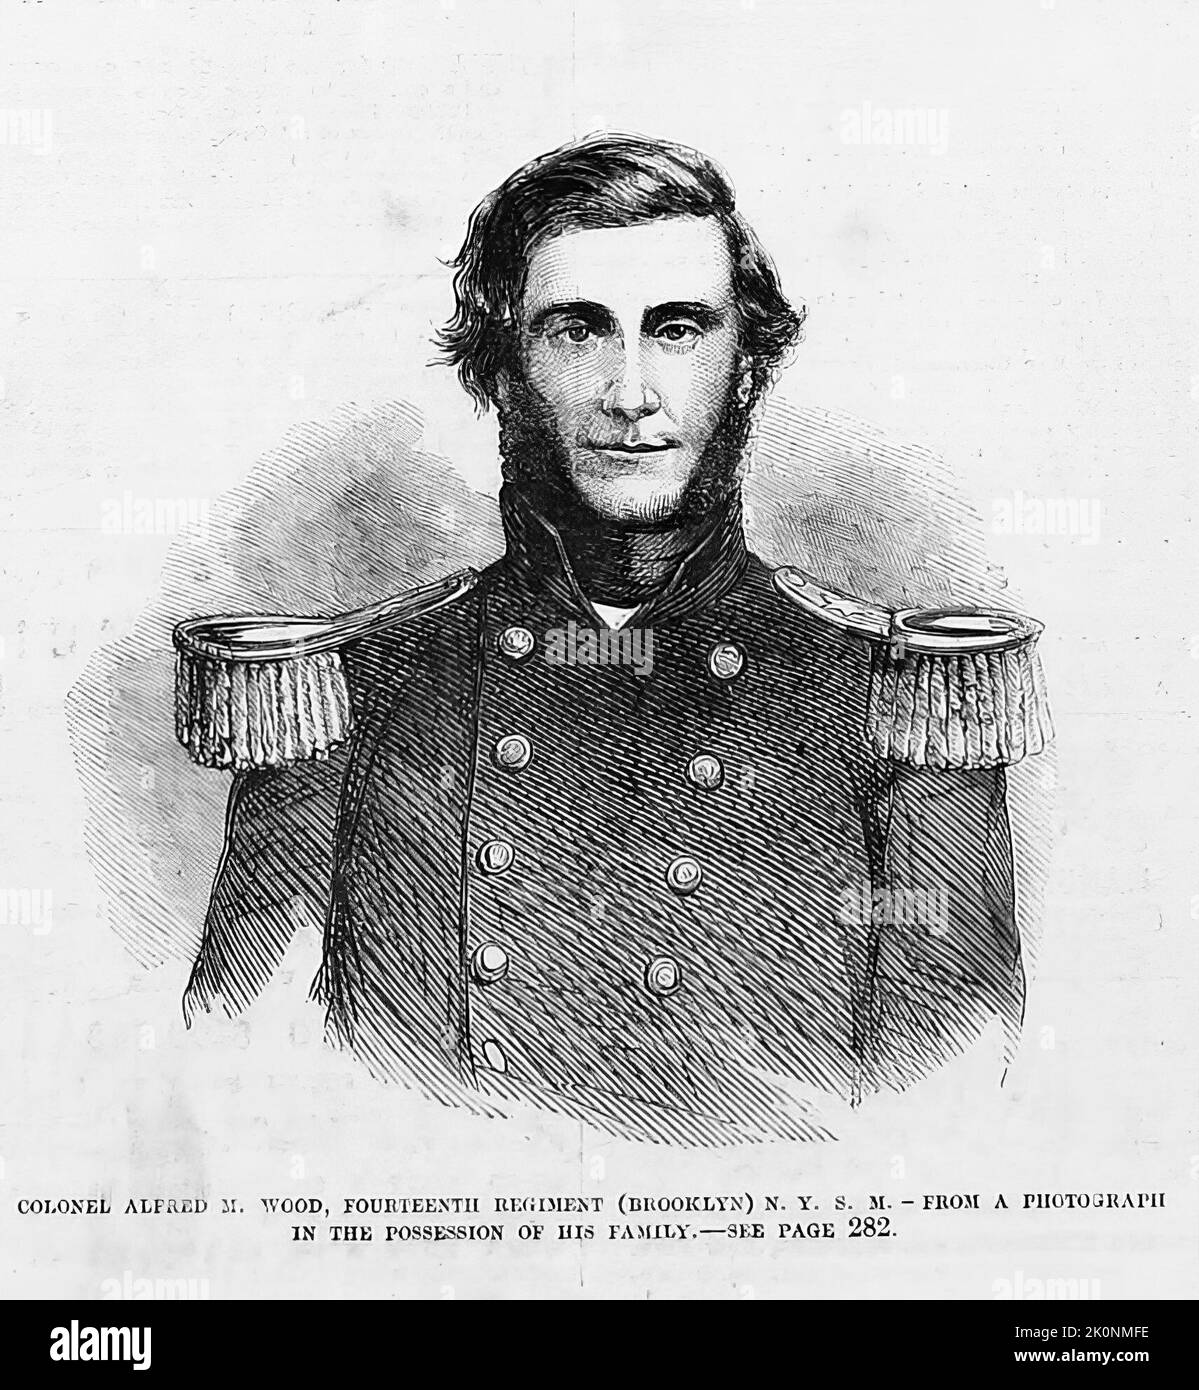 Portrait of Colonel Alfred M. Wood, 14th Regiment (Brooklyn) New York State Militia. September 1861. 19th century American Civil War illustration from Frank Leslie's Illustrated Newspaper Stock Photo